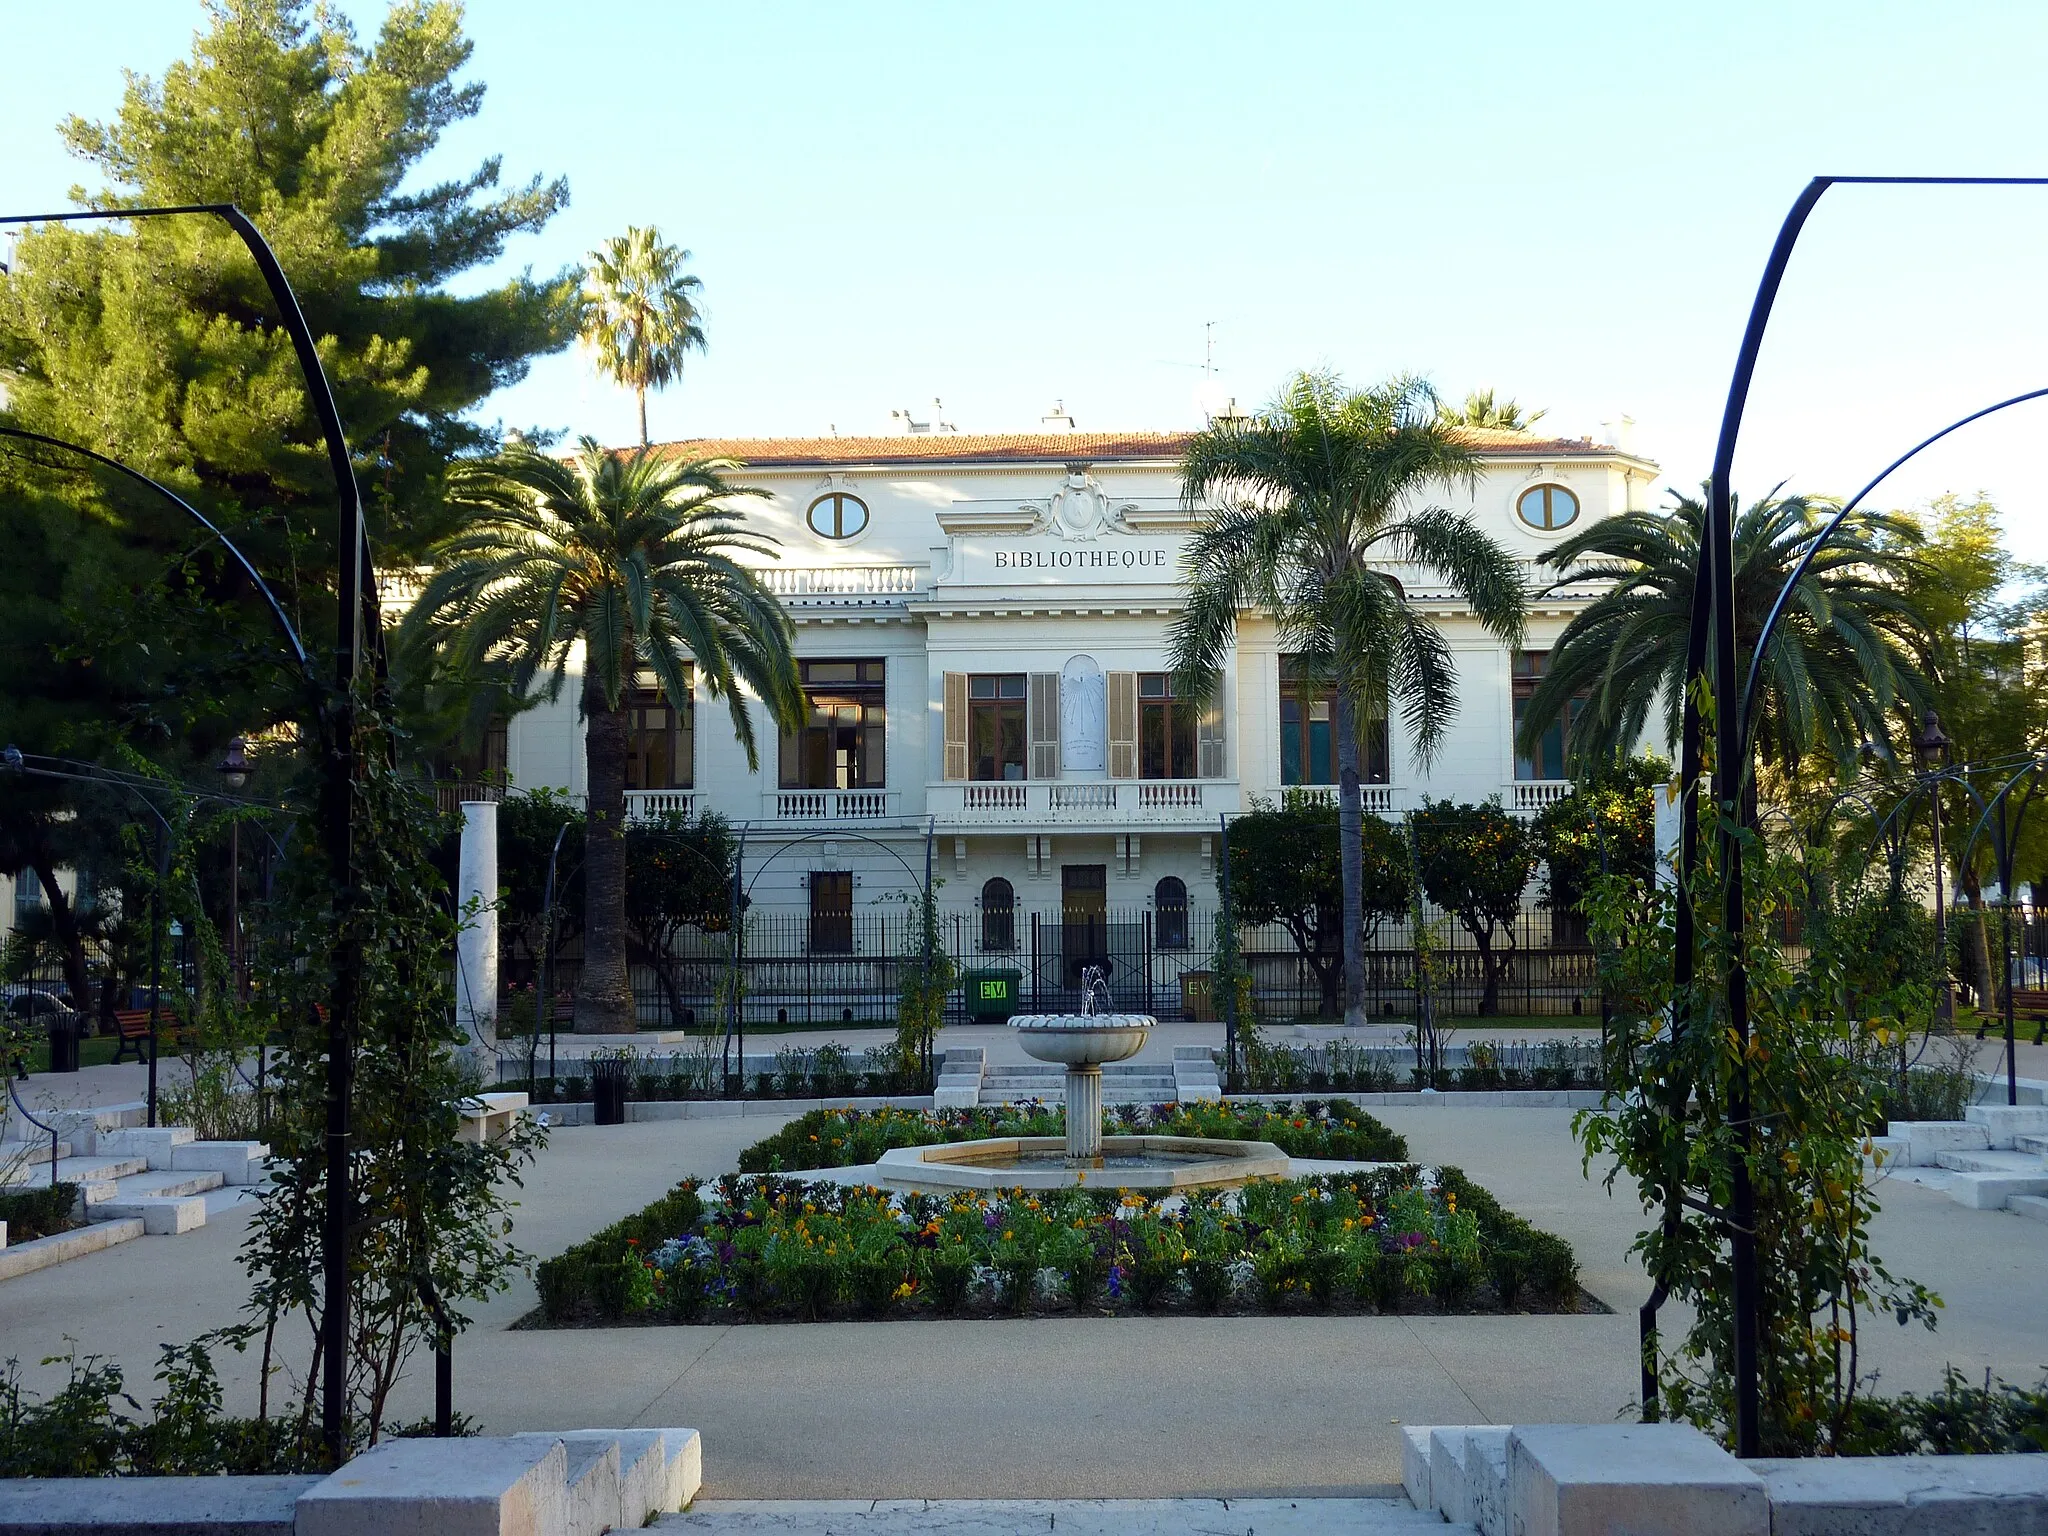 Photo showing: Romain Gary heritage library, Nice, France. Take from the garden.